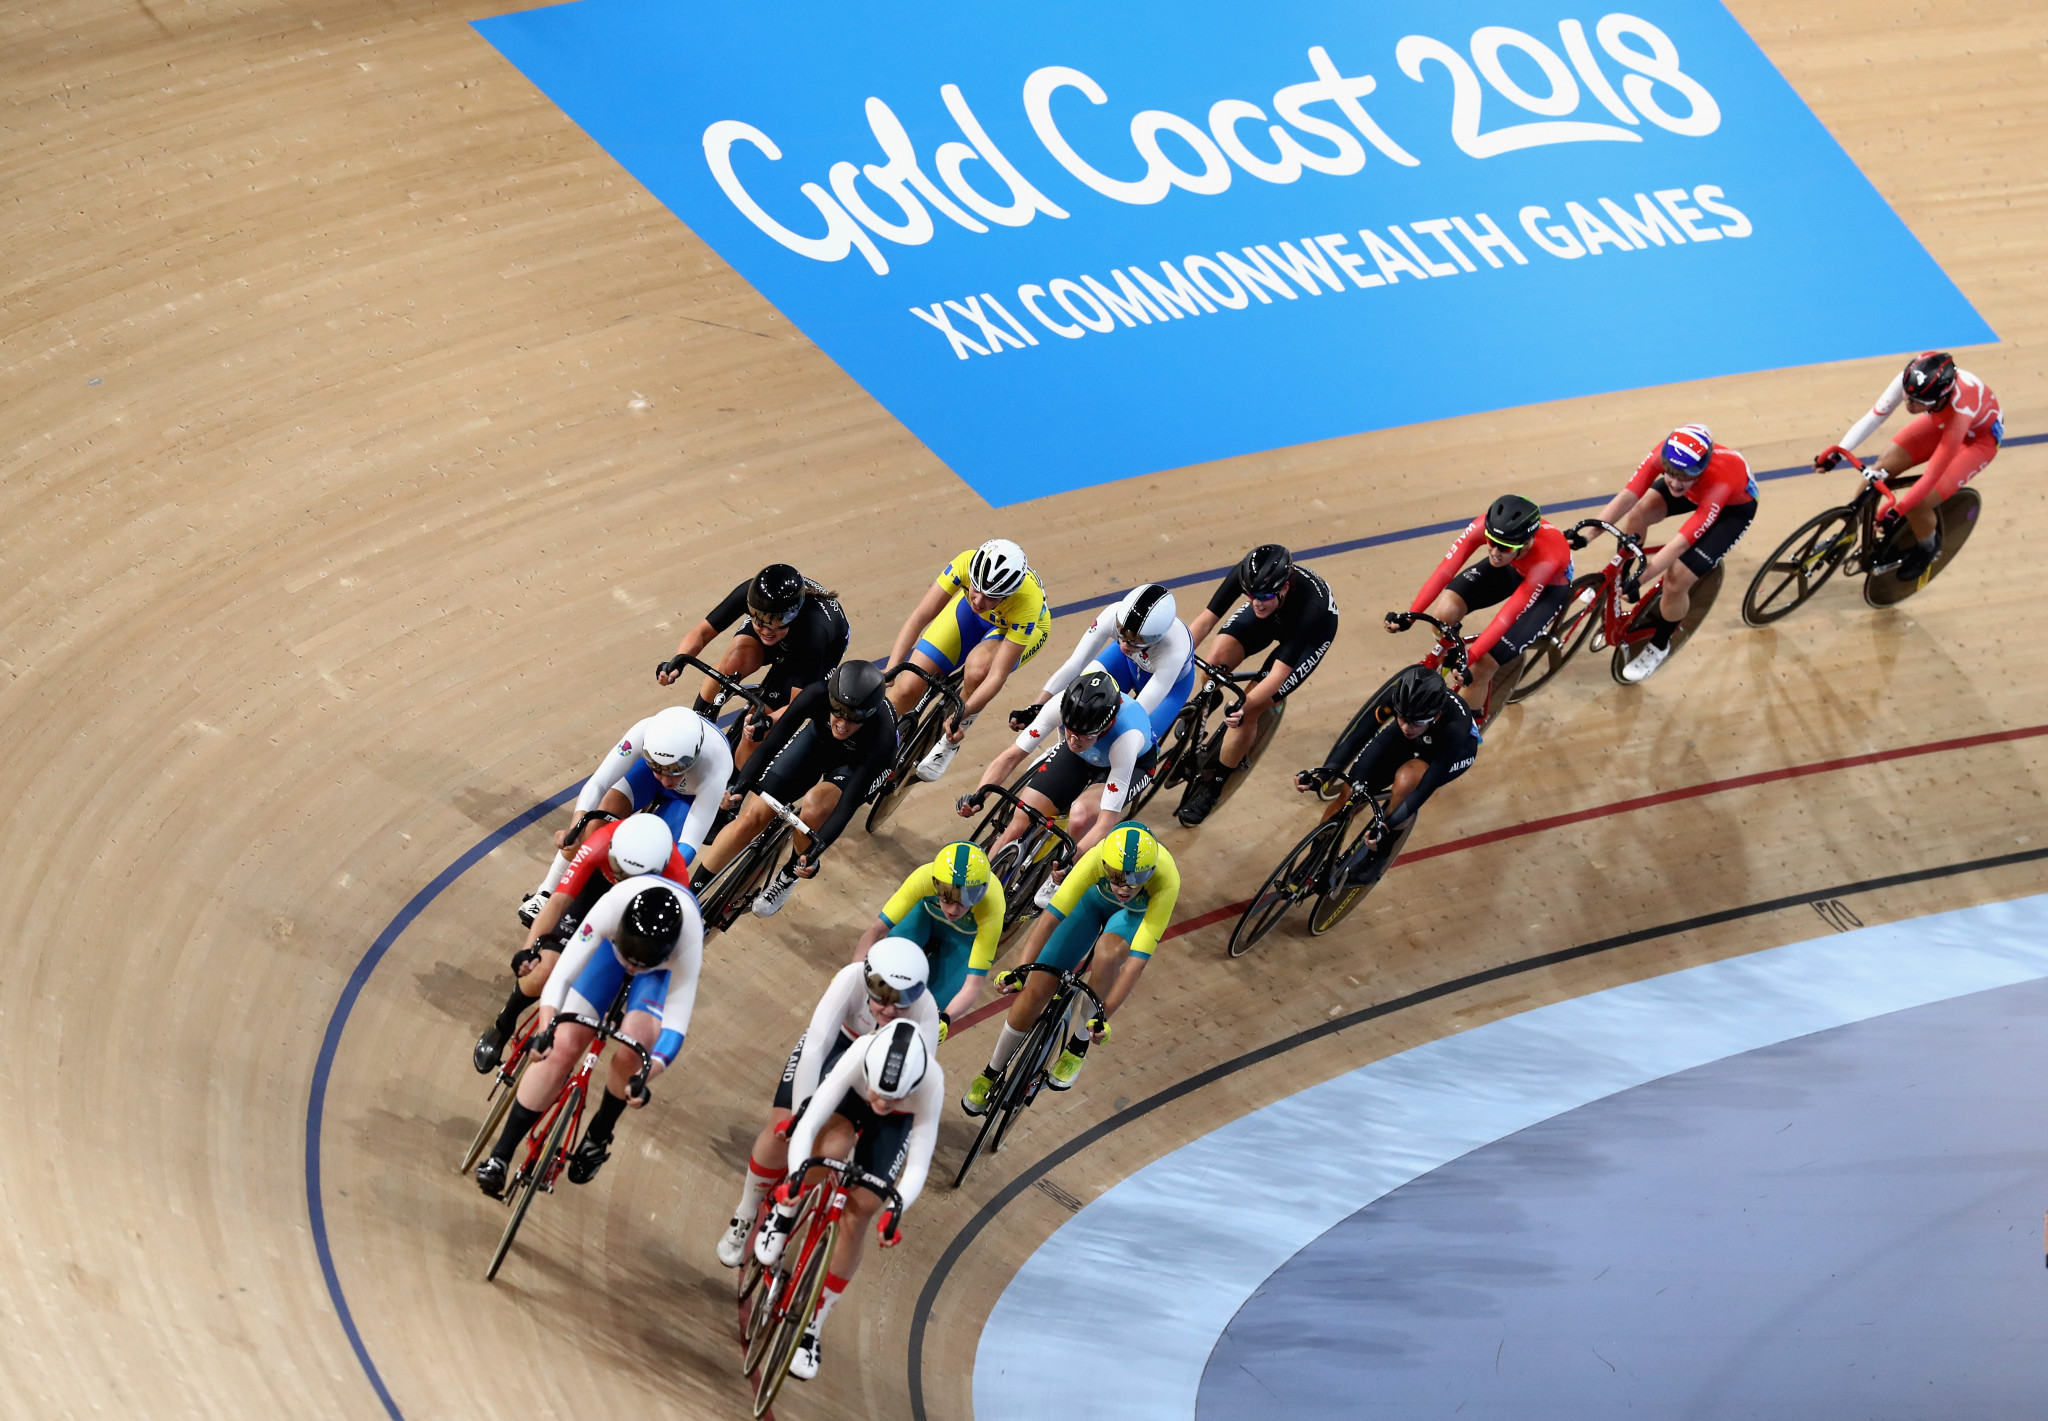 insidethegames is reporting LIVE from the Commonwealth Games in Gold Coast